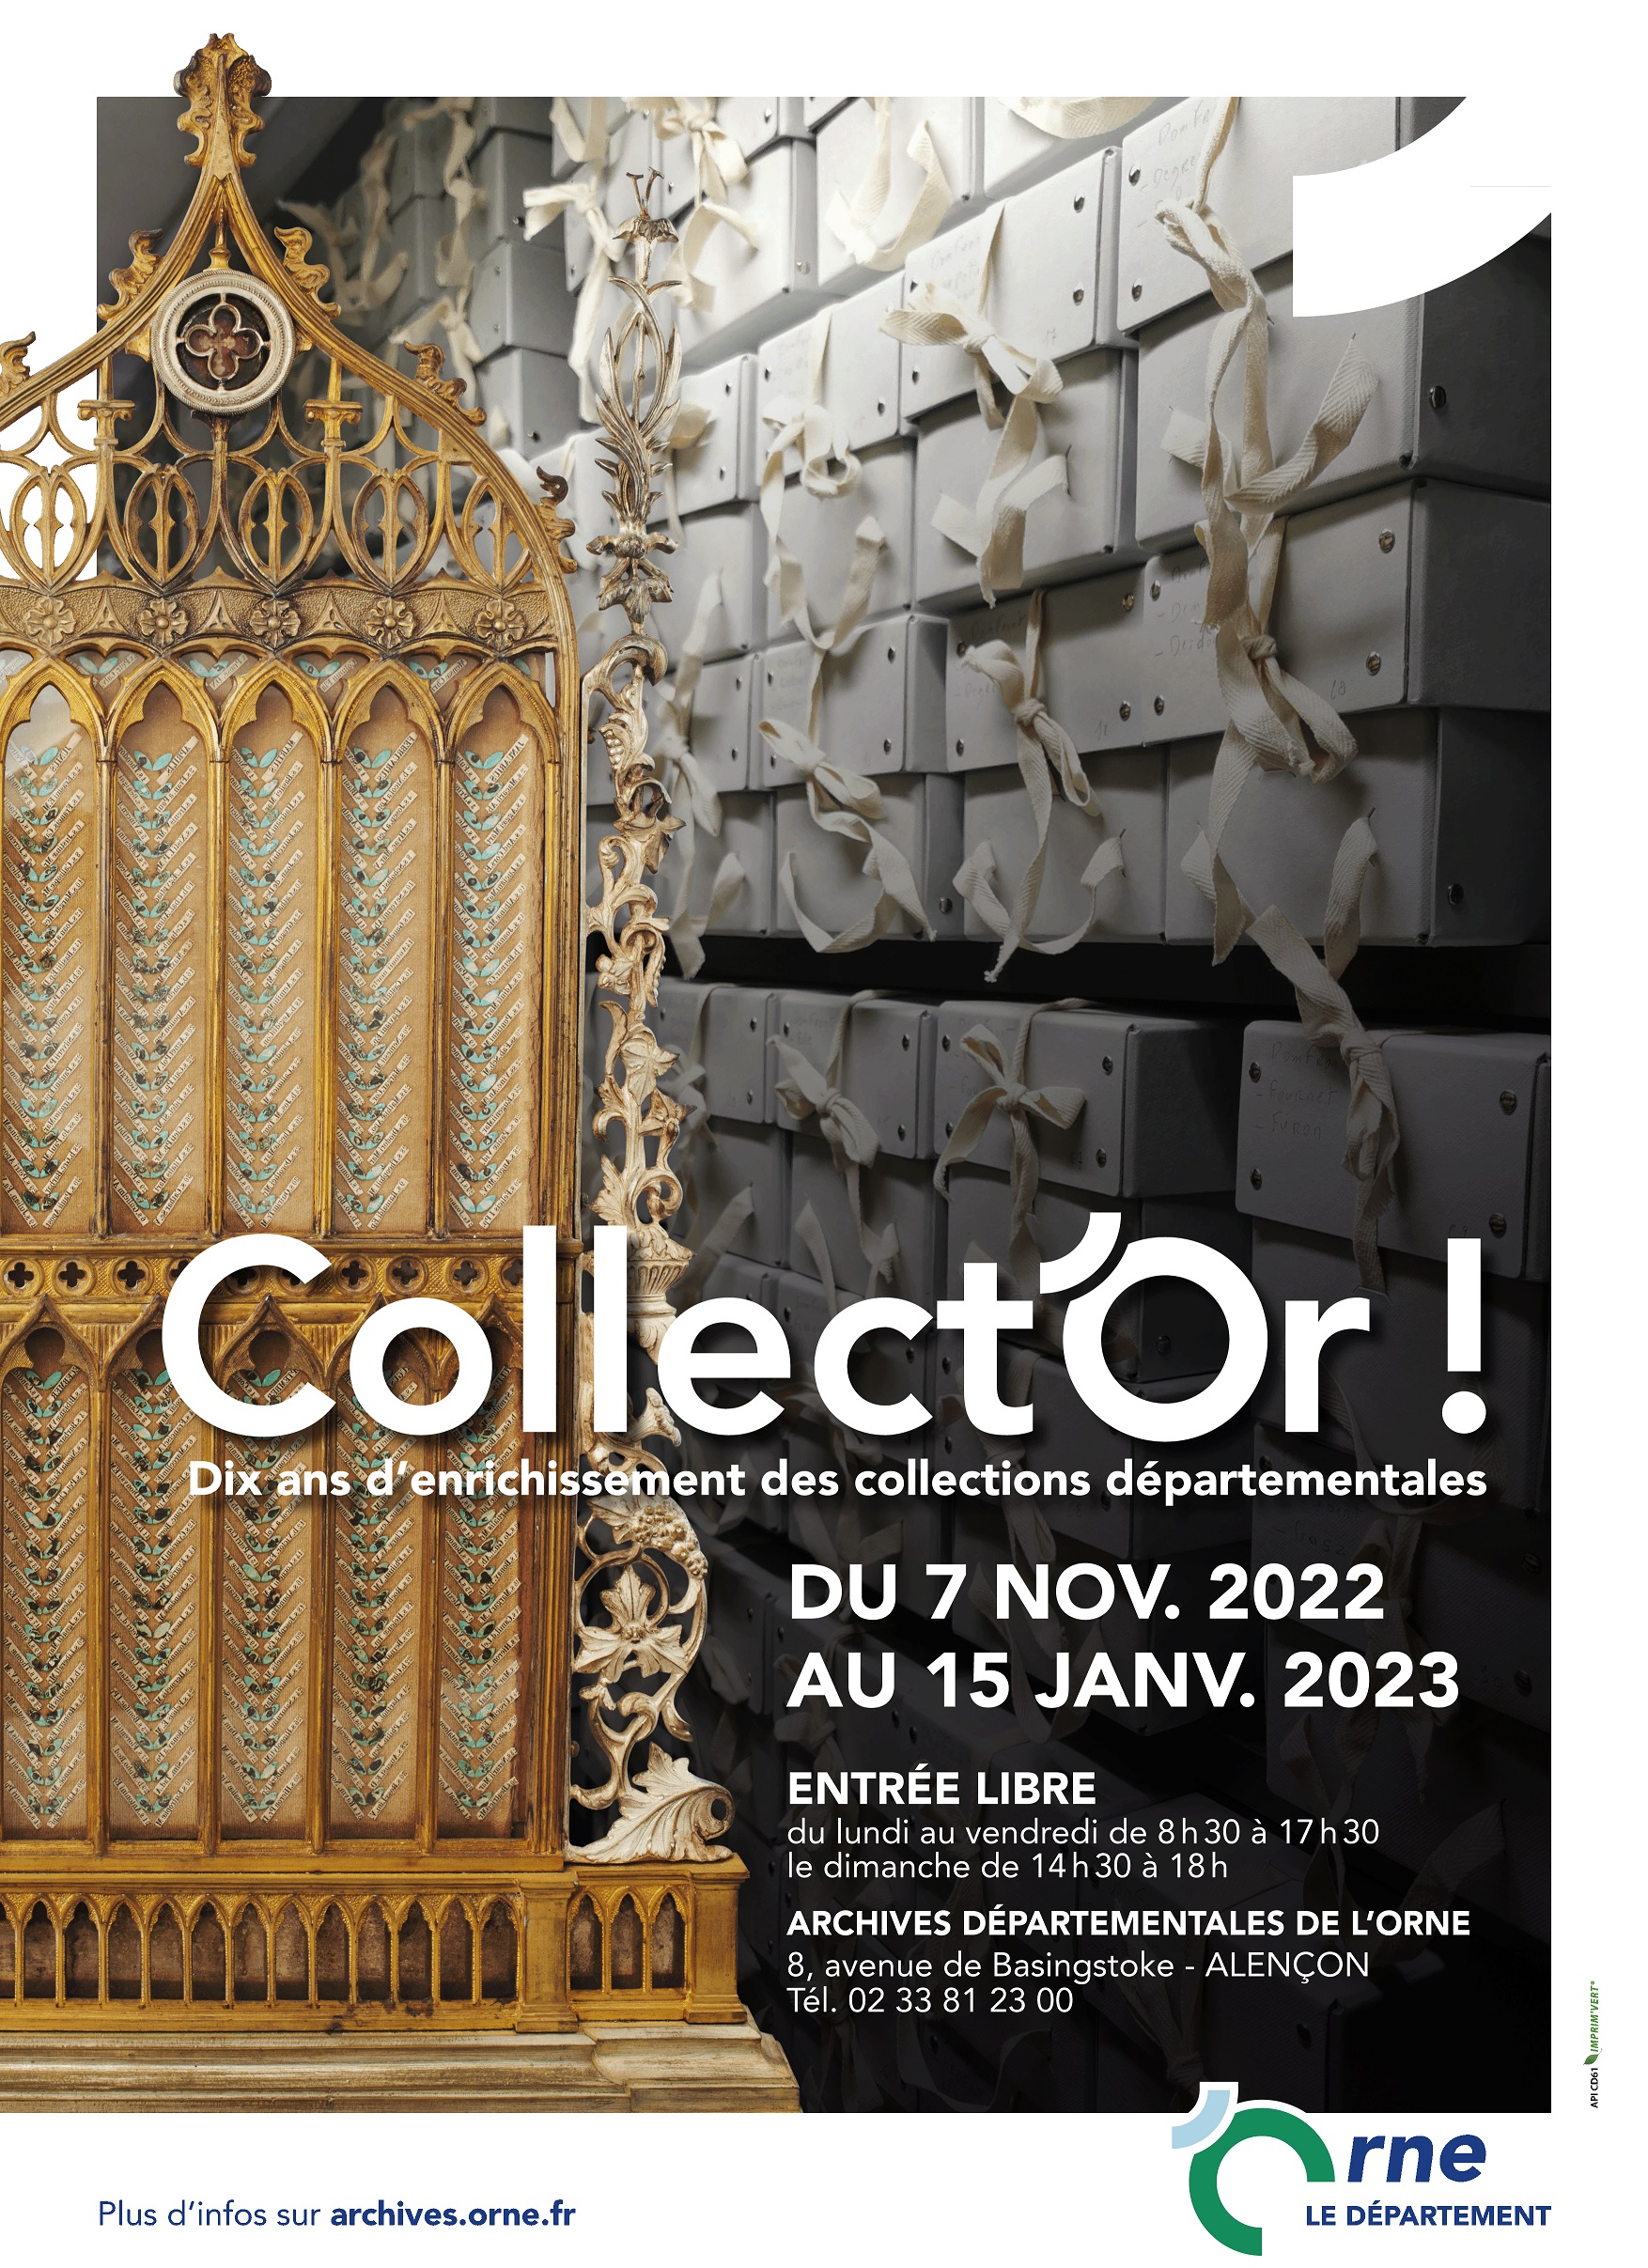 Une exposition Collector